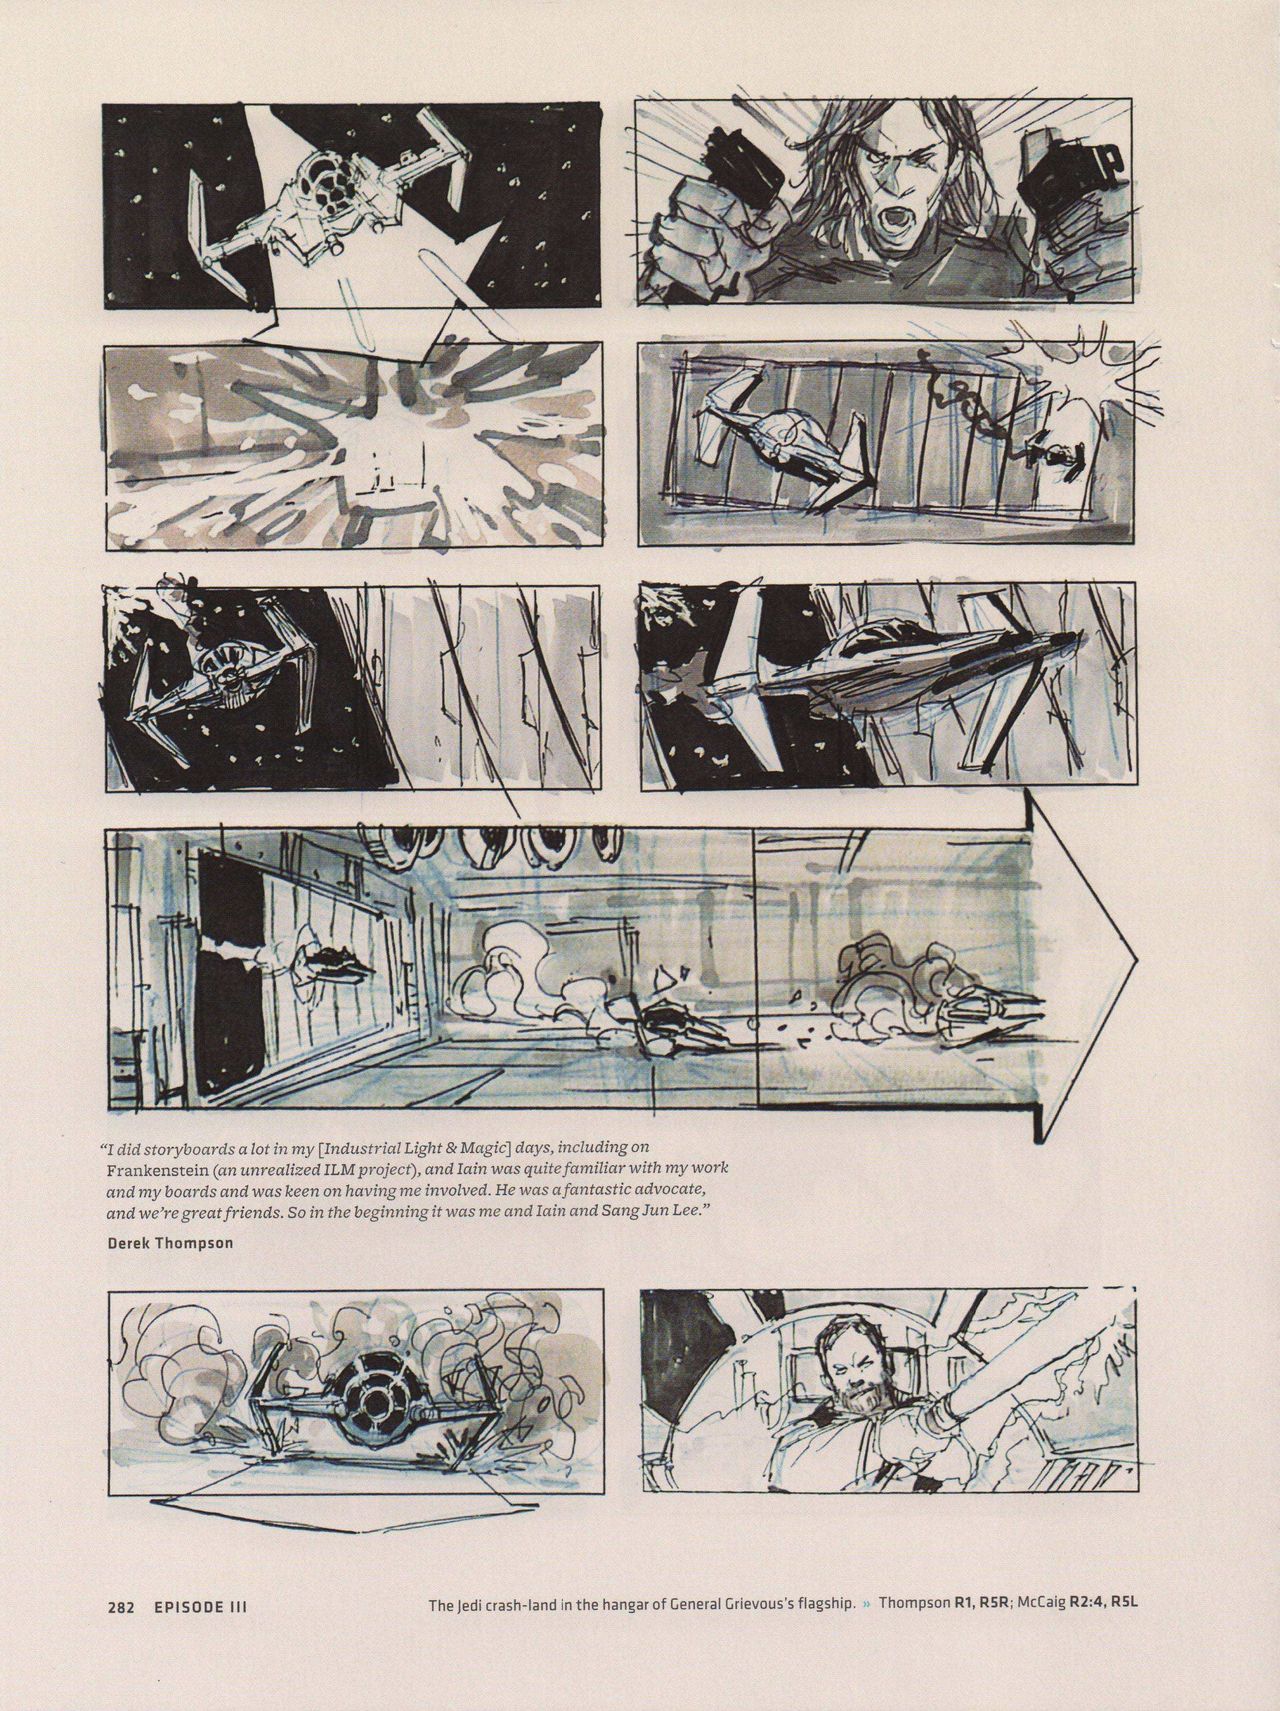 Star Wars Storyboards - The Prequel Trilogy 286